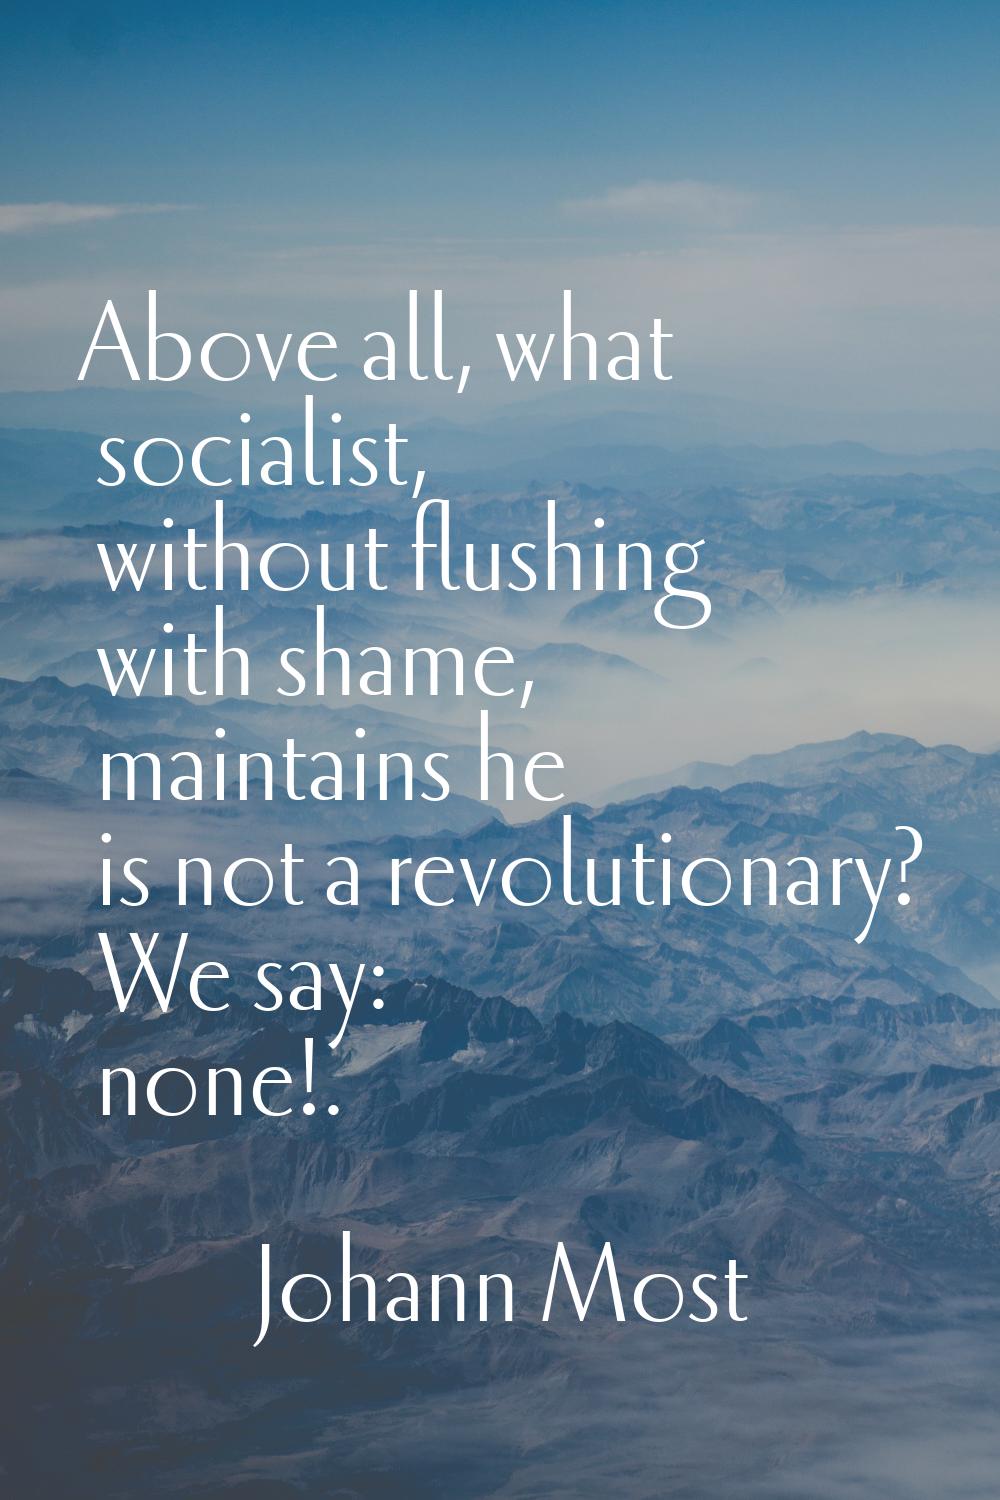 Above all, what socialist, without flushing with shame, maintains he is not a revolutionary? We say